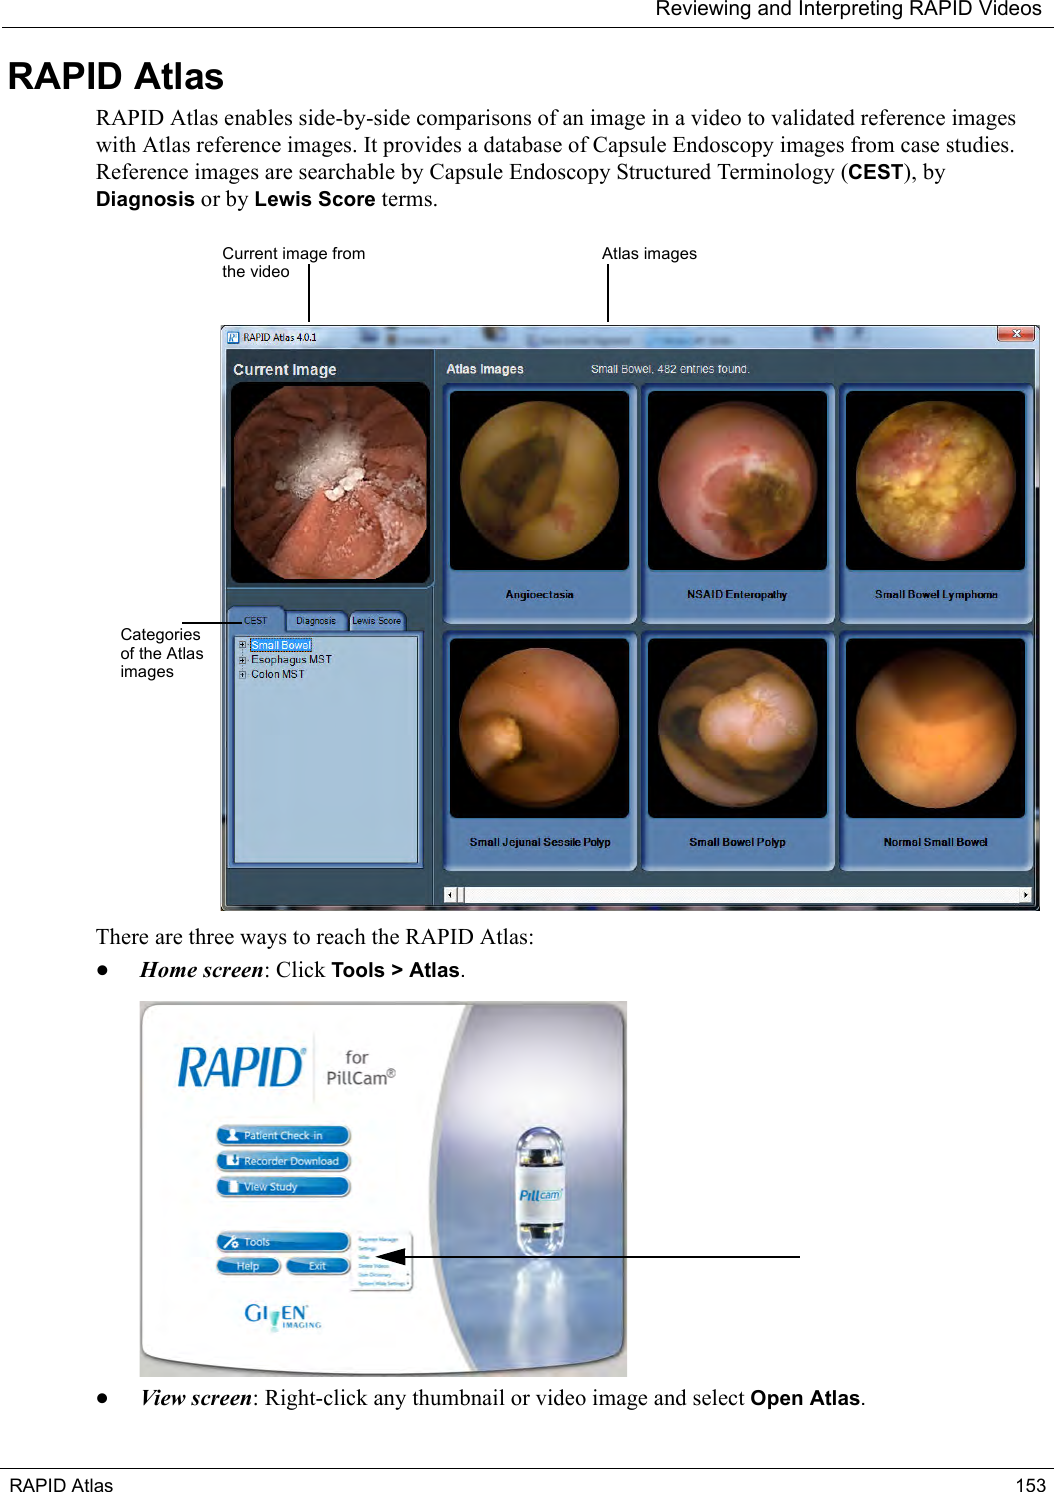 Reviewing and Interpreting RAPID VideosRAPID Atlas 153RAPID AtlasRAPID Atlas enables side-by-side comparisons of an image in a video to validated reference images with Atlas reference images. It provides a database of Capsule Endoscopy images from case studies. Reference images are searchable by Capsule Endoscopy Structured Terminology (CEST), by Diagnosis or by Lewis Score terms.There are three ways to reach the RAPID Atlas:•Home screen: Click Tools &gt; Atlas. •View screen: Right-click any thumbnail or video image and select Open Atlas.Current image from the videoAtlas images Categories of the Atlas images